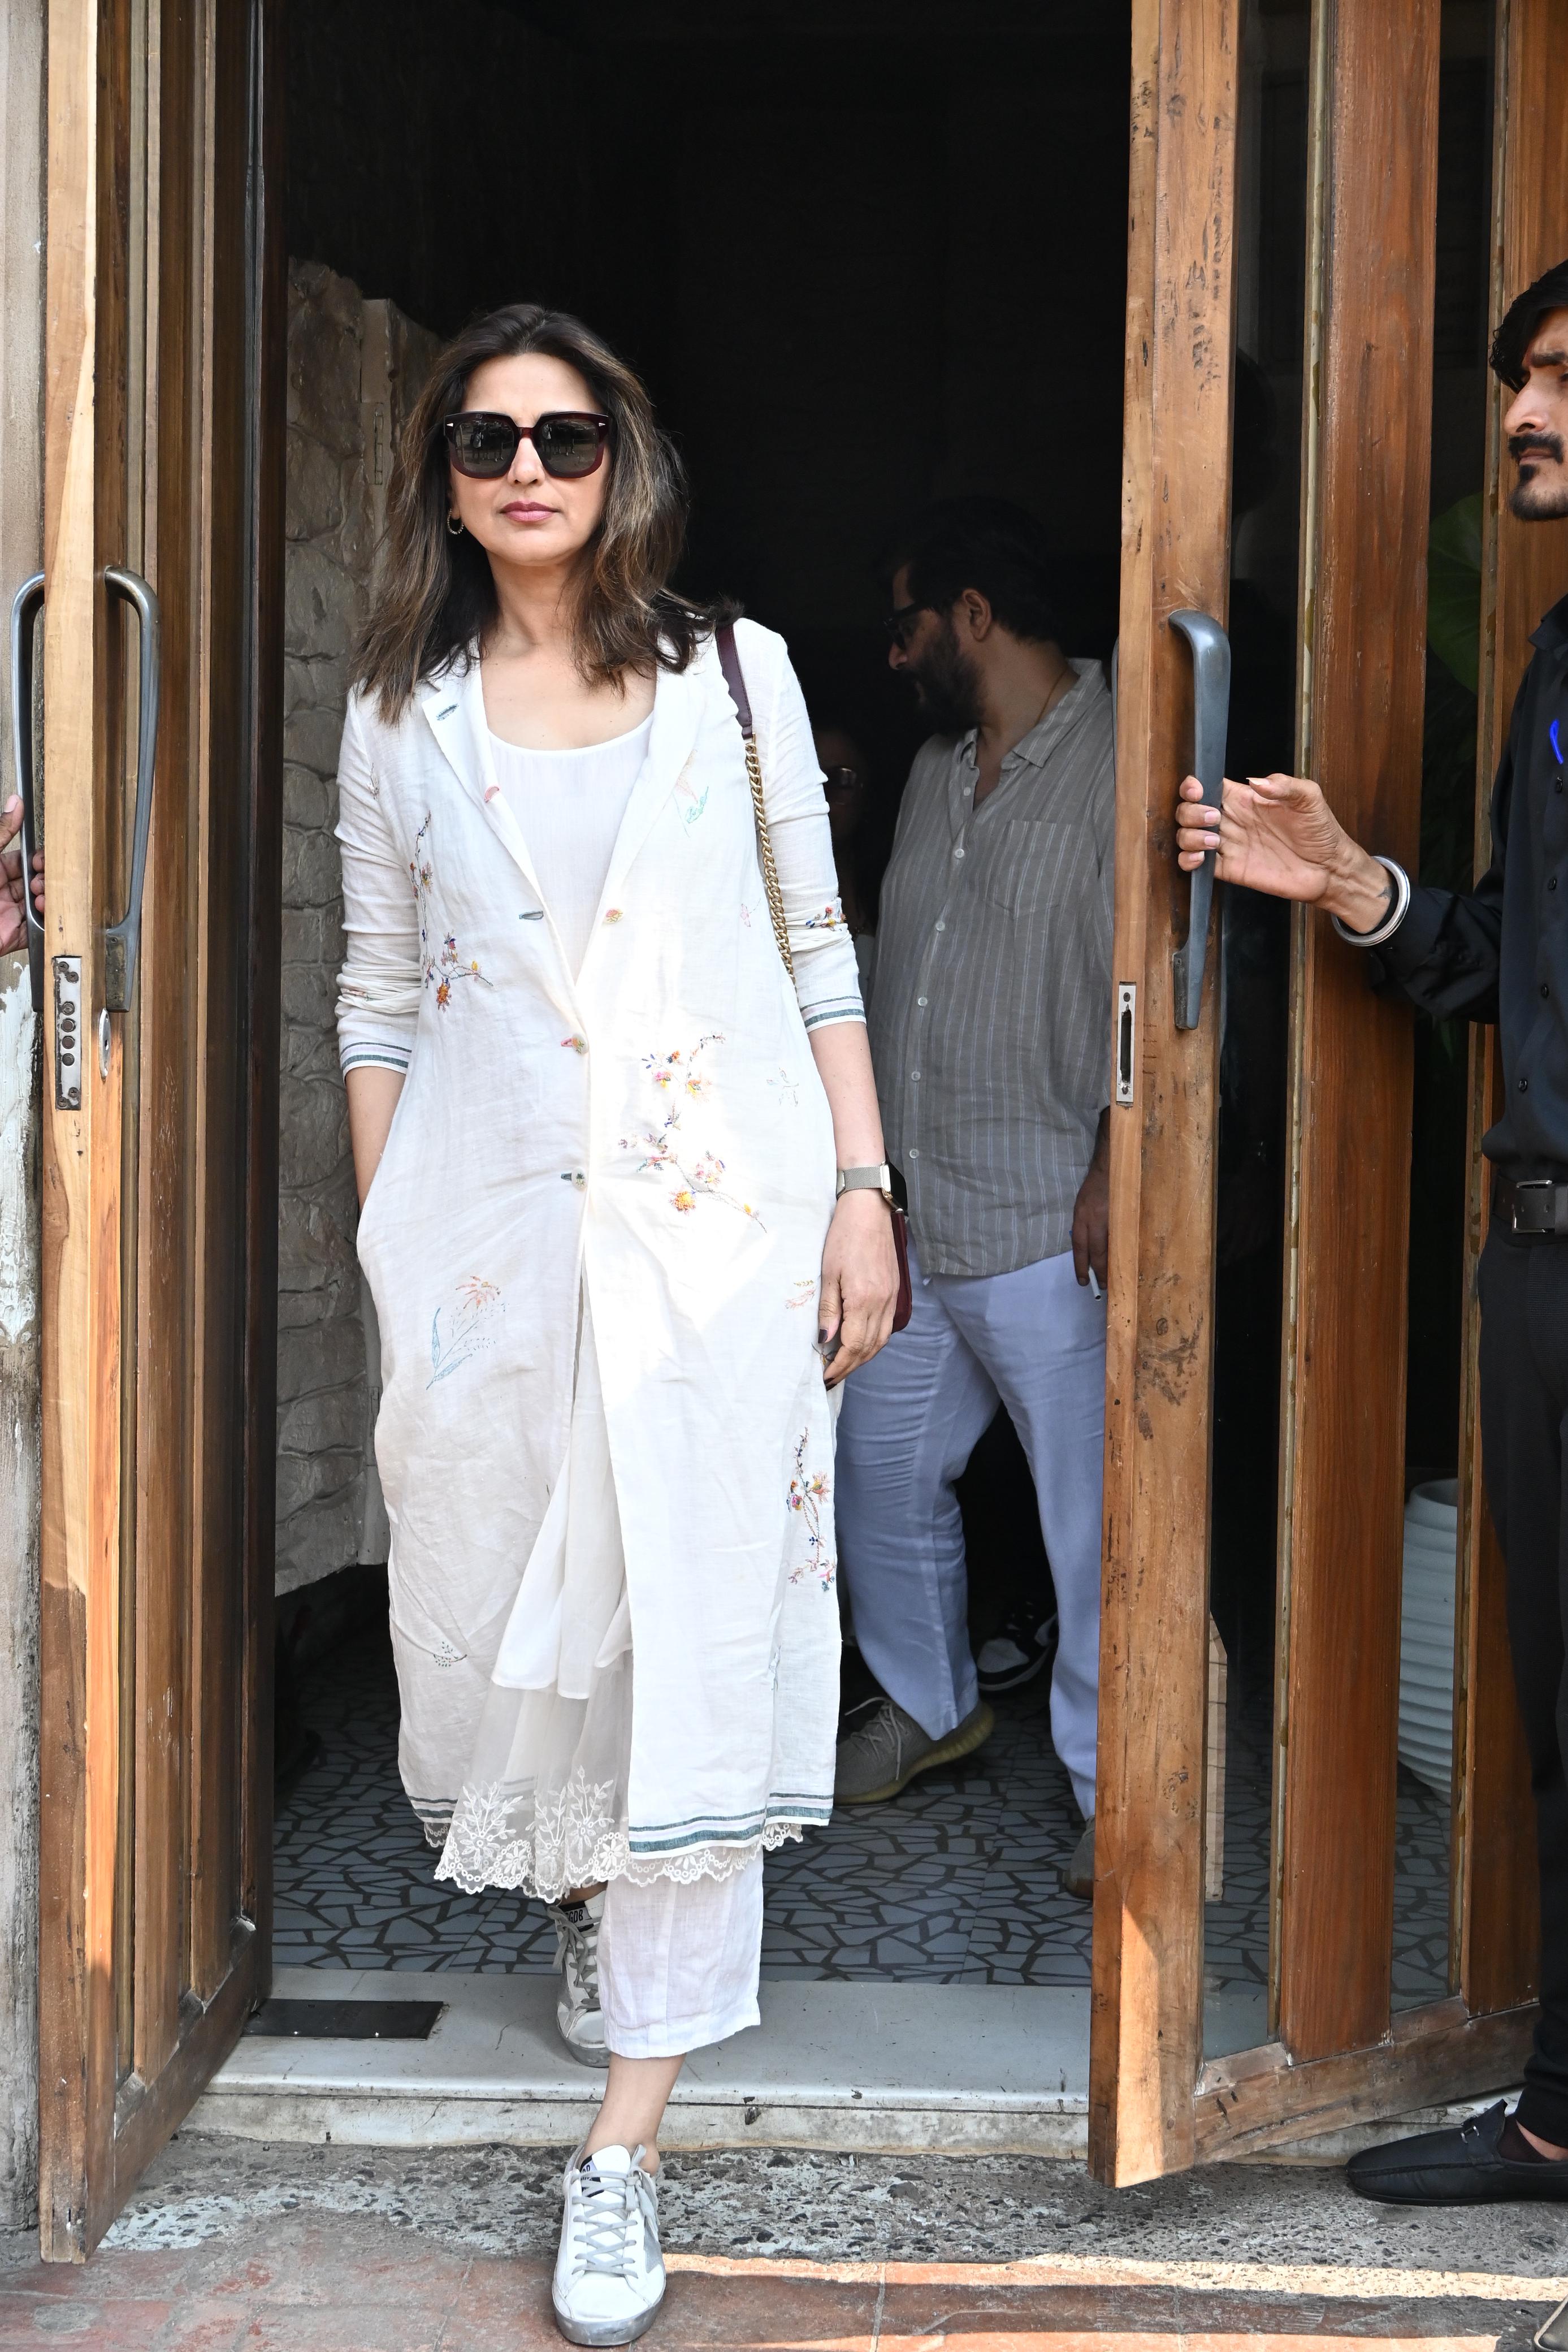 Sonali Bendre was clicked with her husband after a tasty meal at Bastian, Bandra